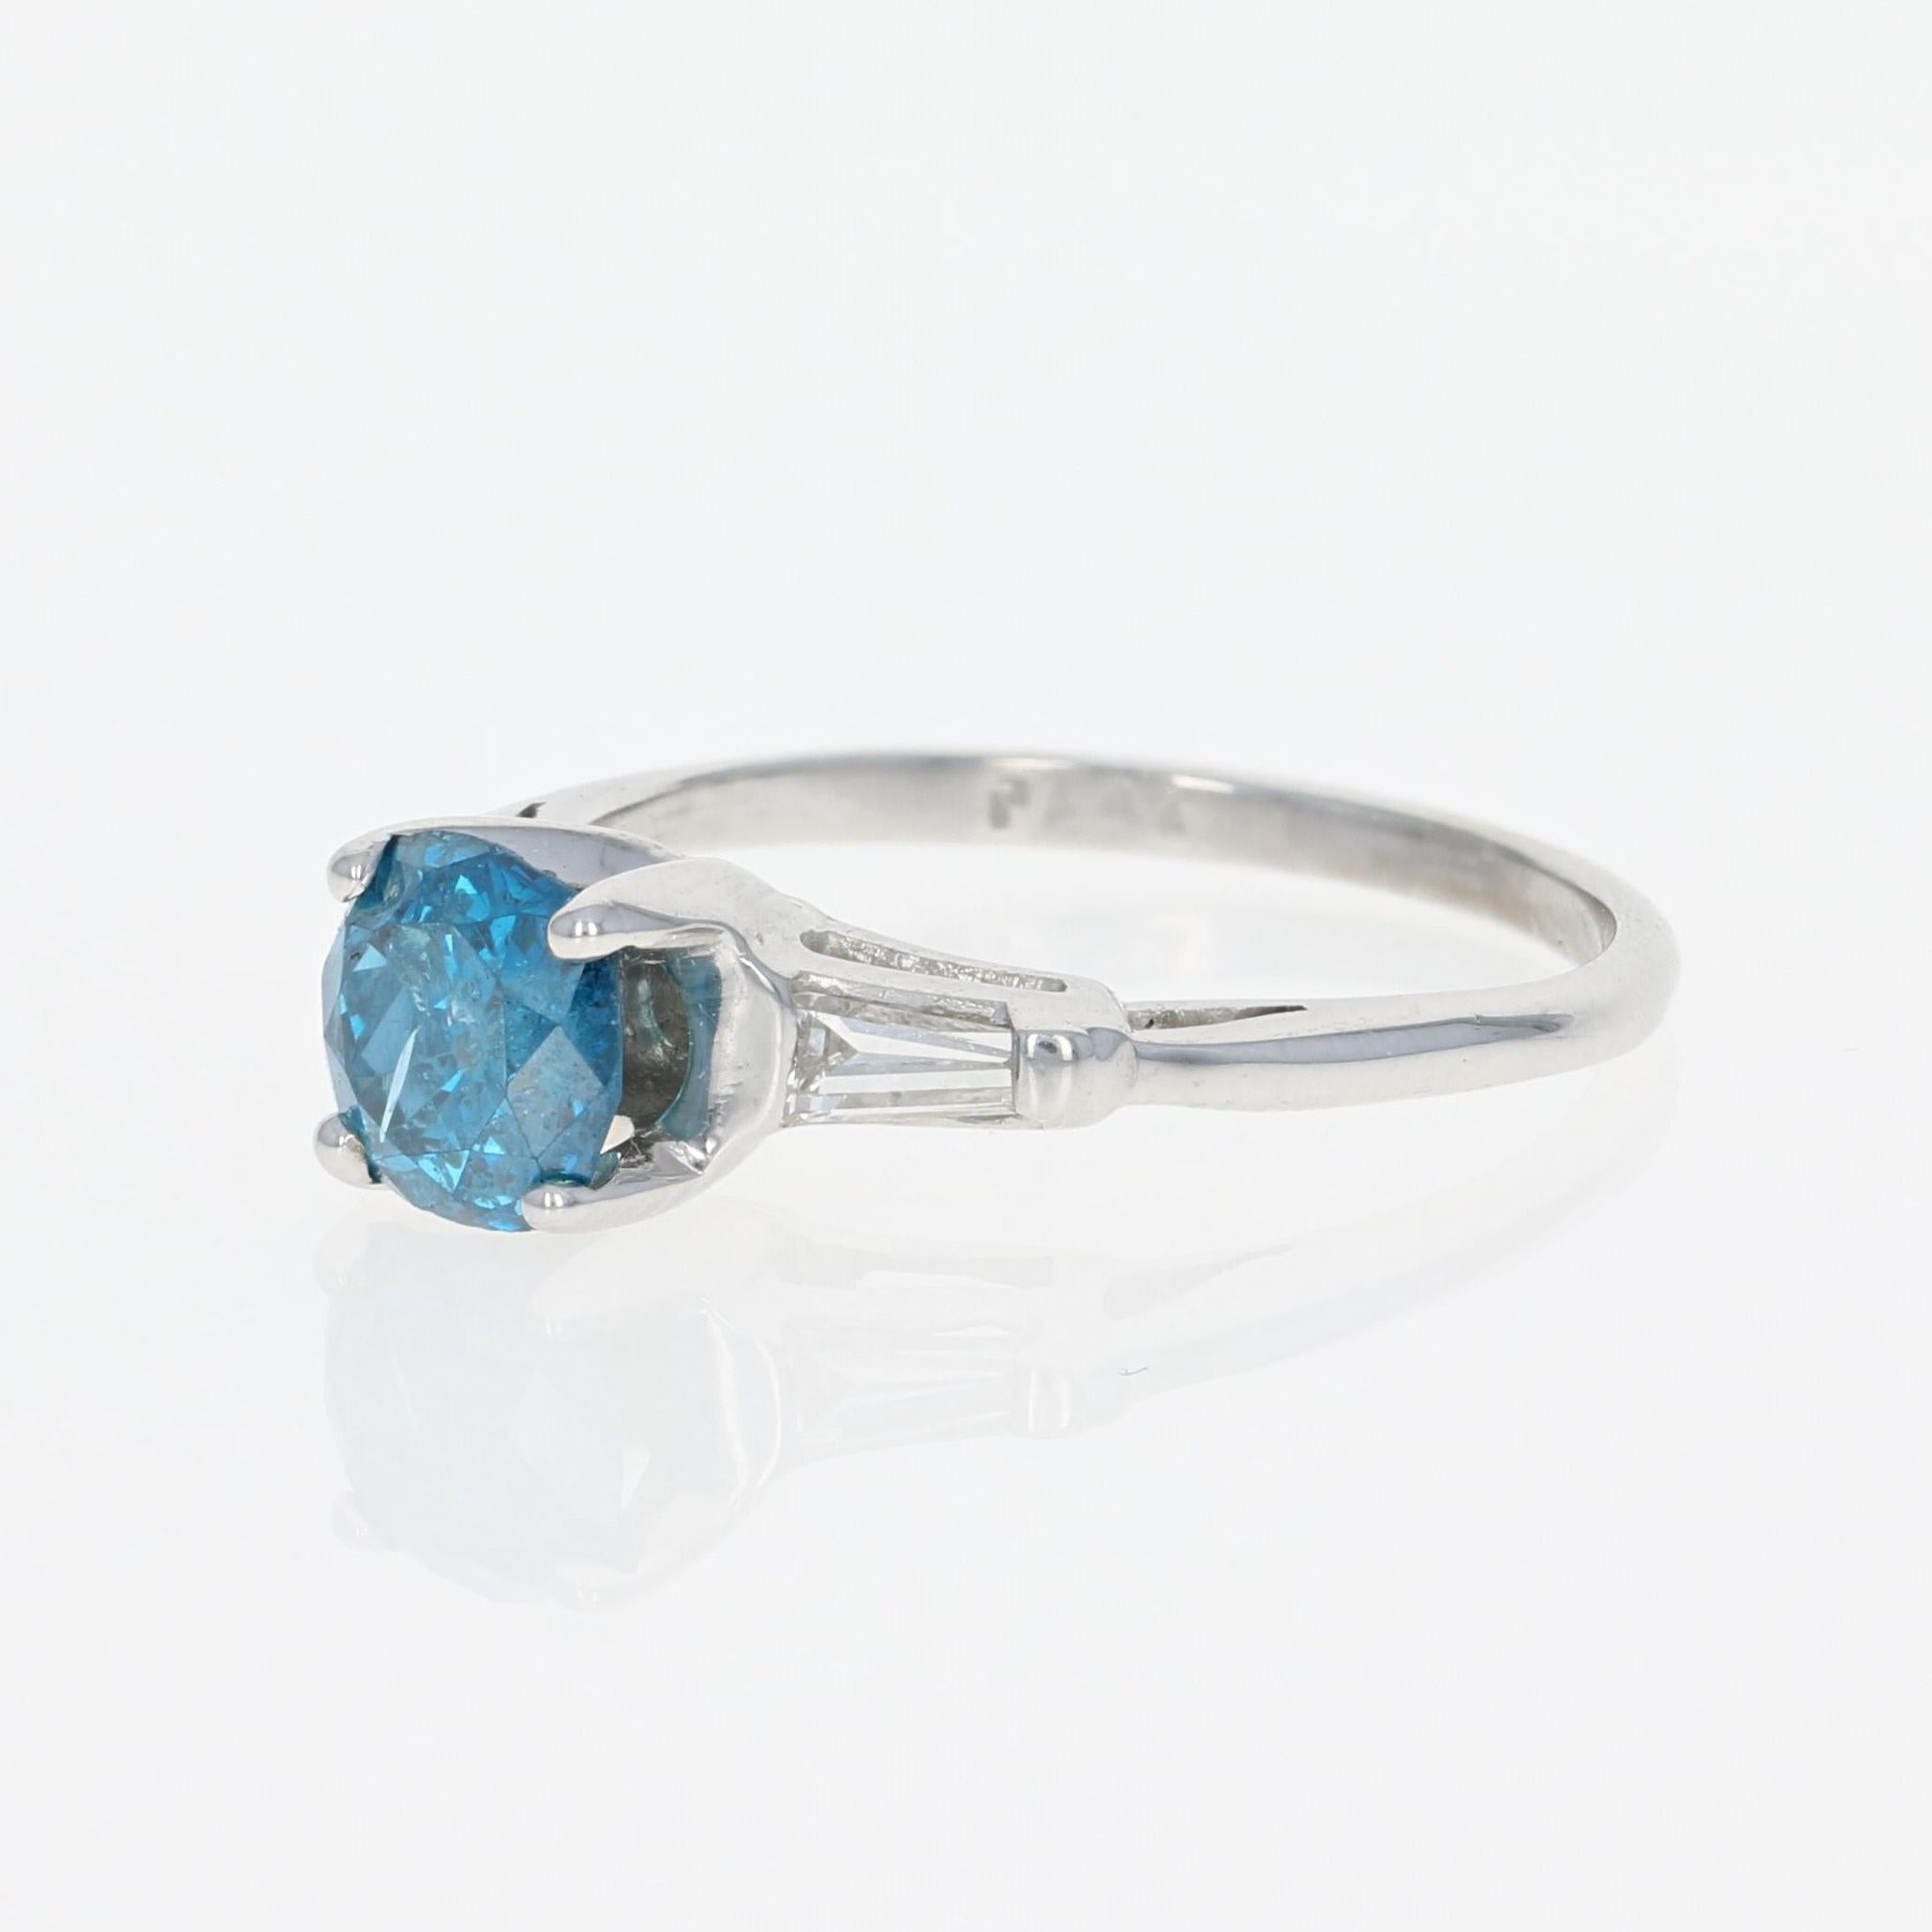 The bride who likes the tradition of diamonds but dreams of something uniquely hers will love this engagement ring! Fashioned in platinum, a precious metal prized for its strength and enduring beauty, this piece features a Fancy Blue diamond